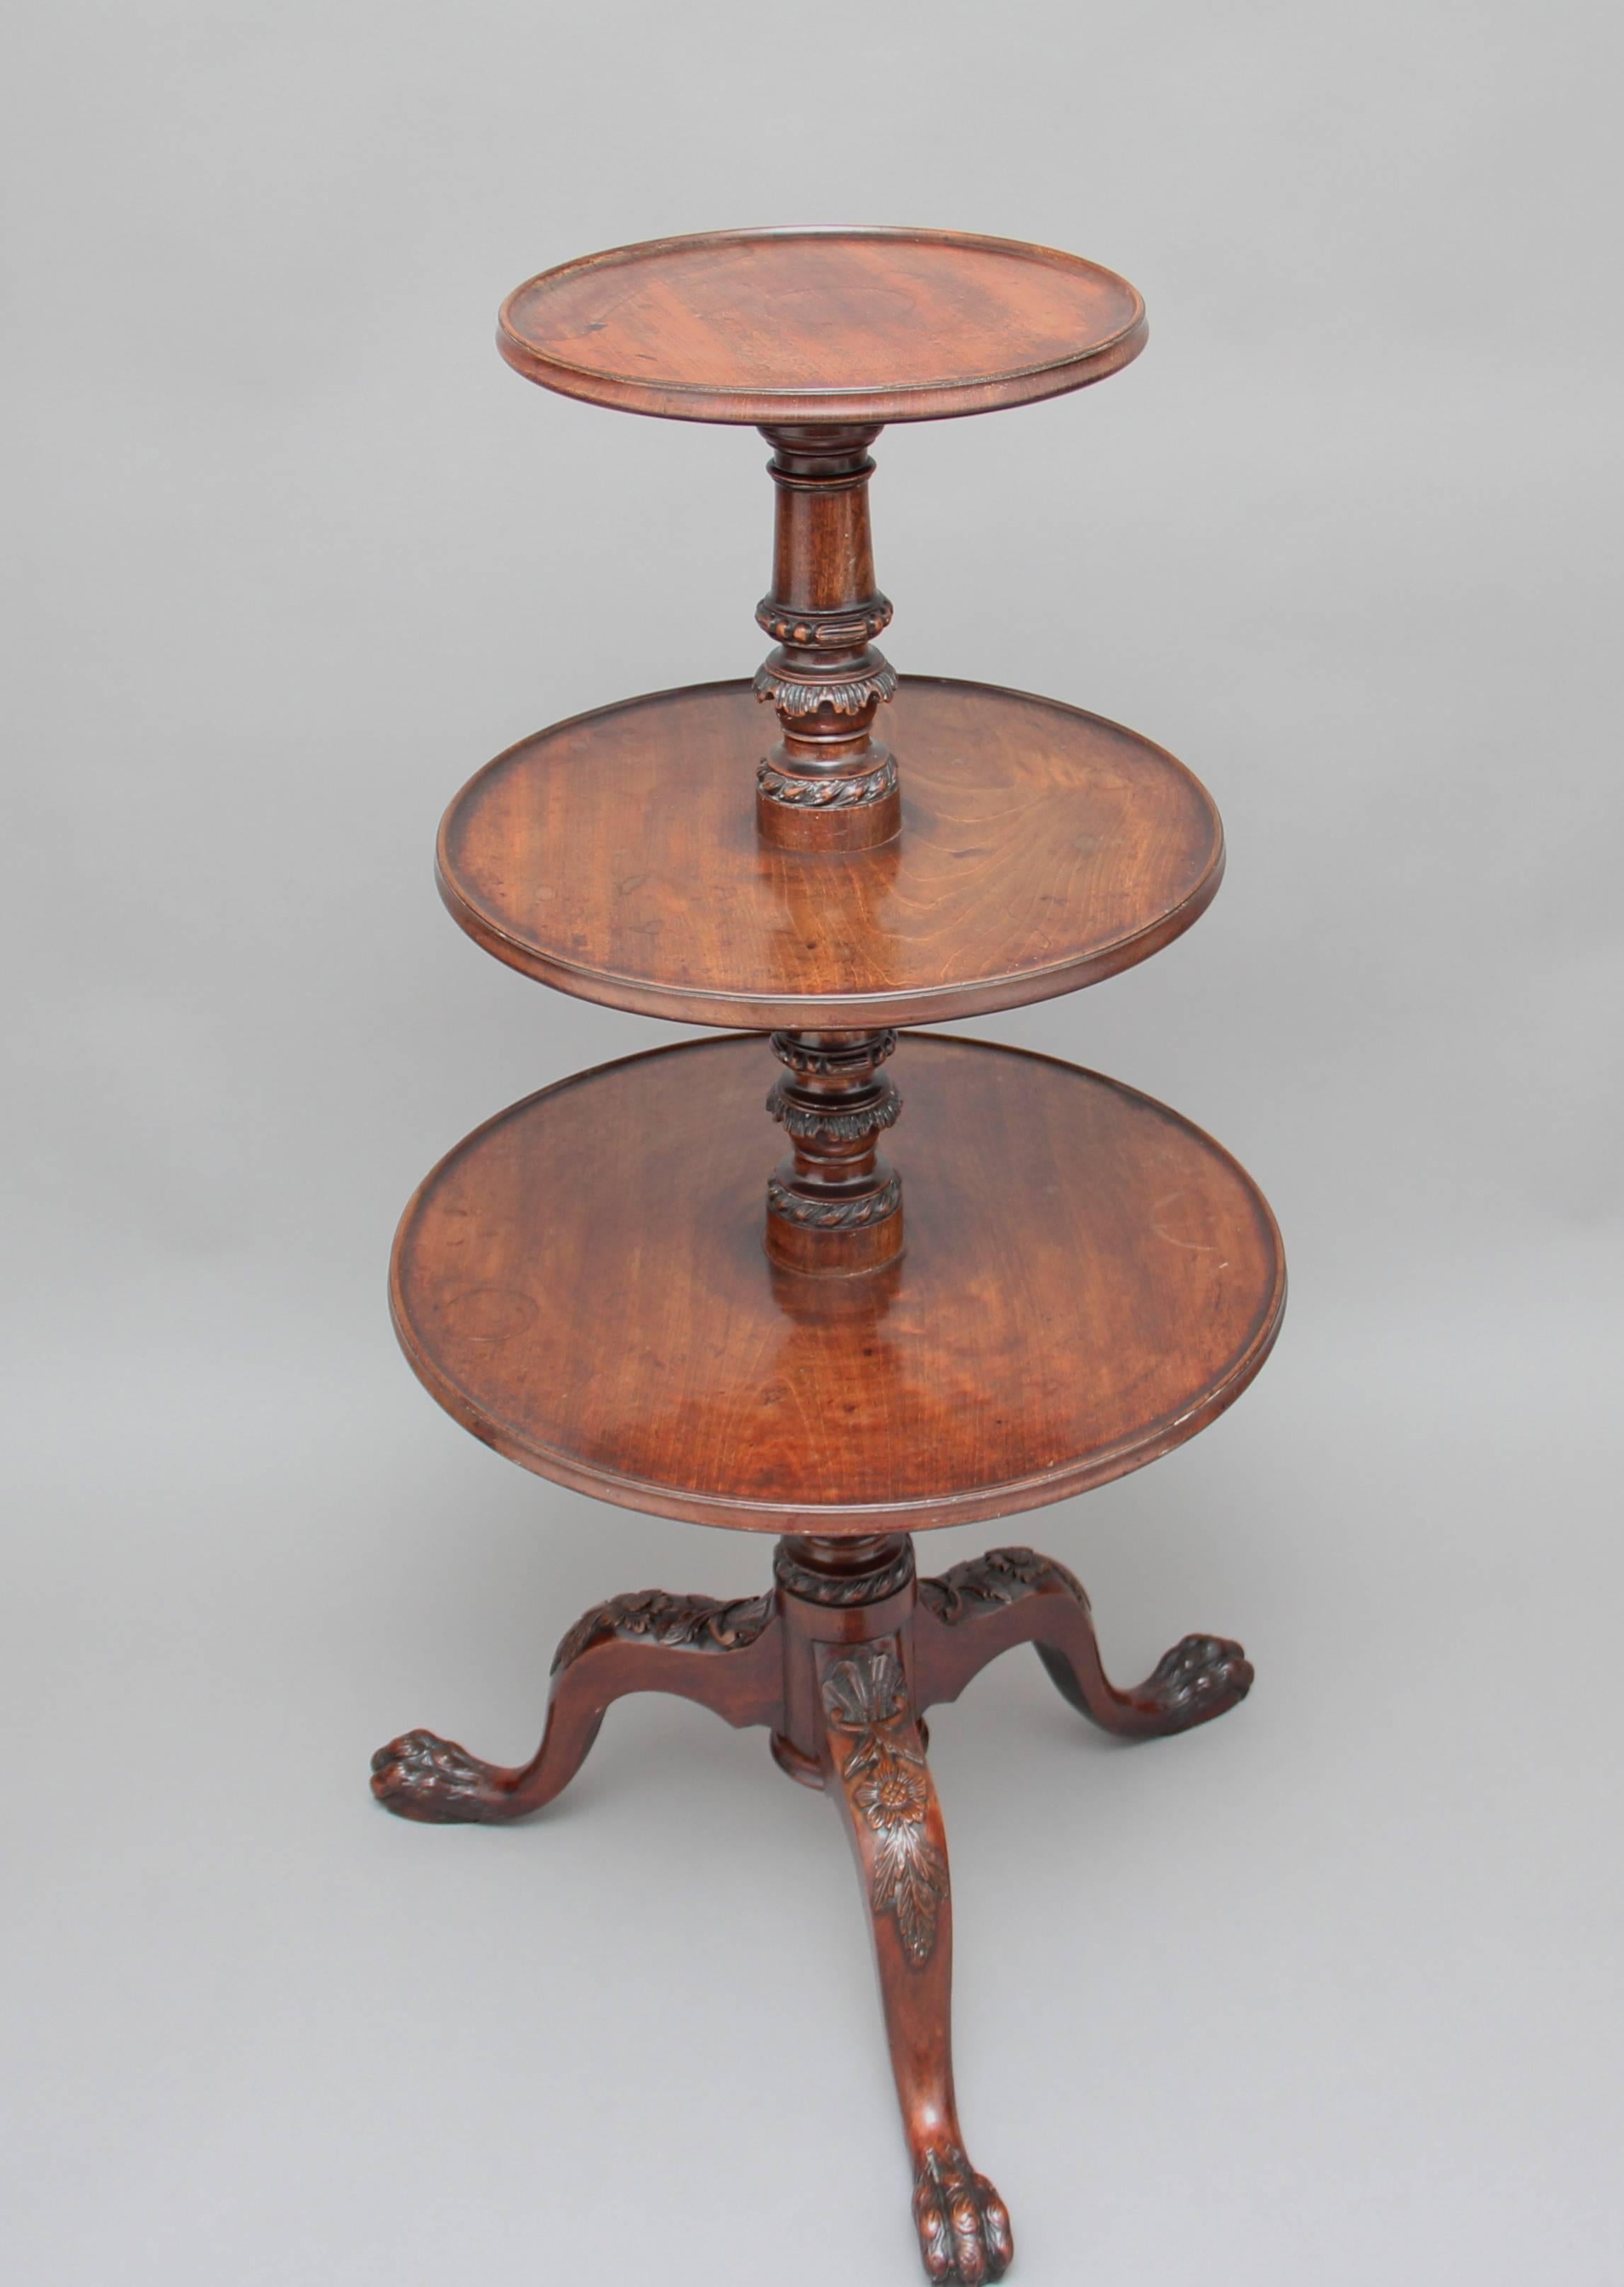 A superb quality early 19th century mahogany three tier dumbwaiter, the wonderfully carved stem supporting three dish tops, standing on three carved cabriole legs ending on a claw foot, circa 1800.